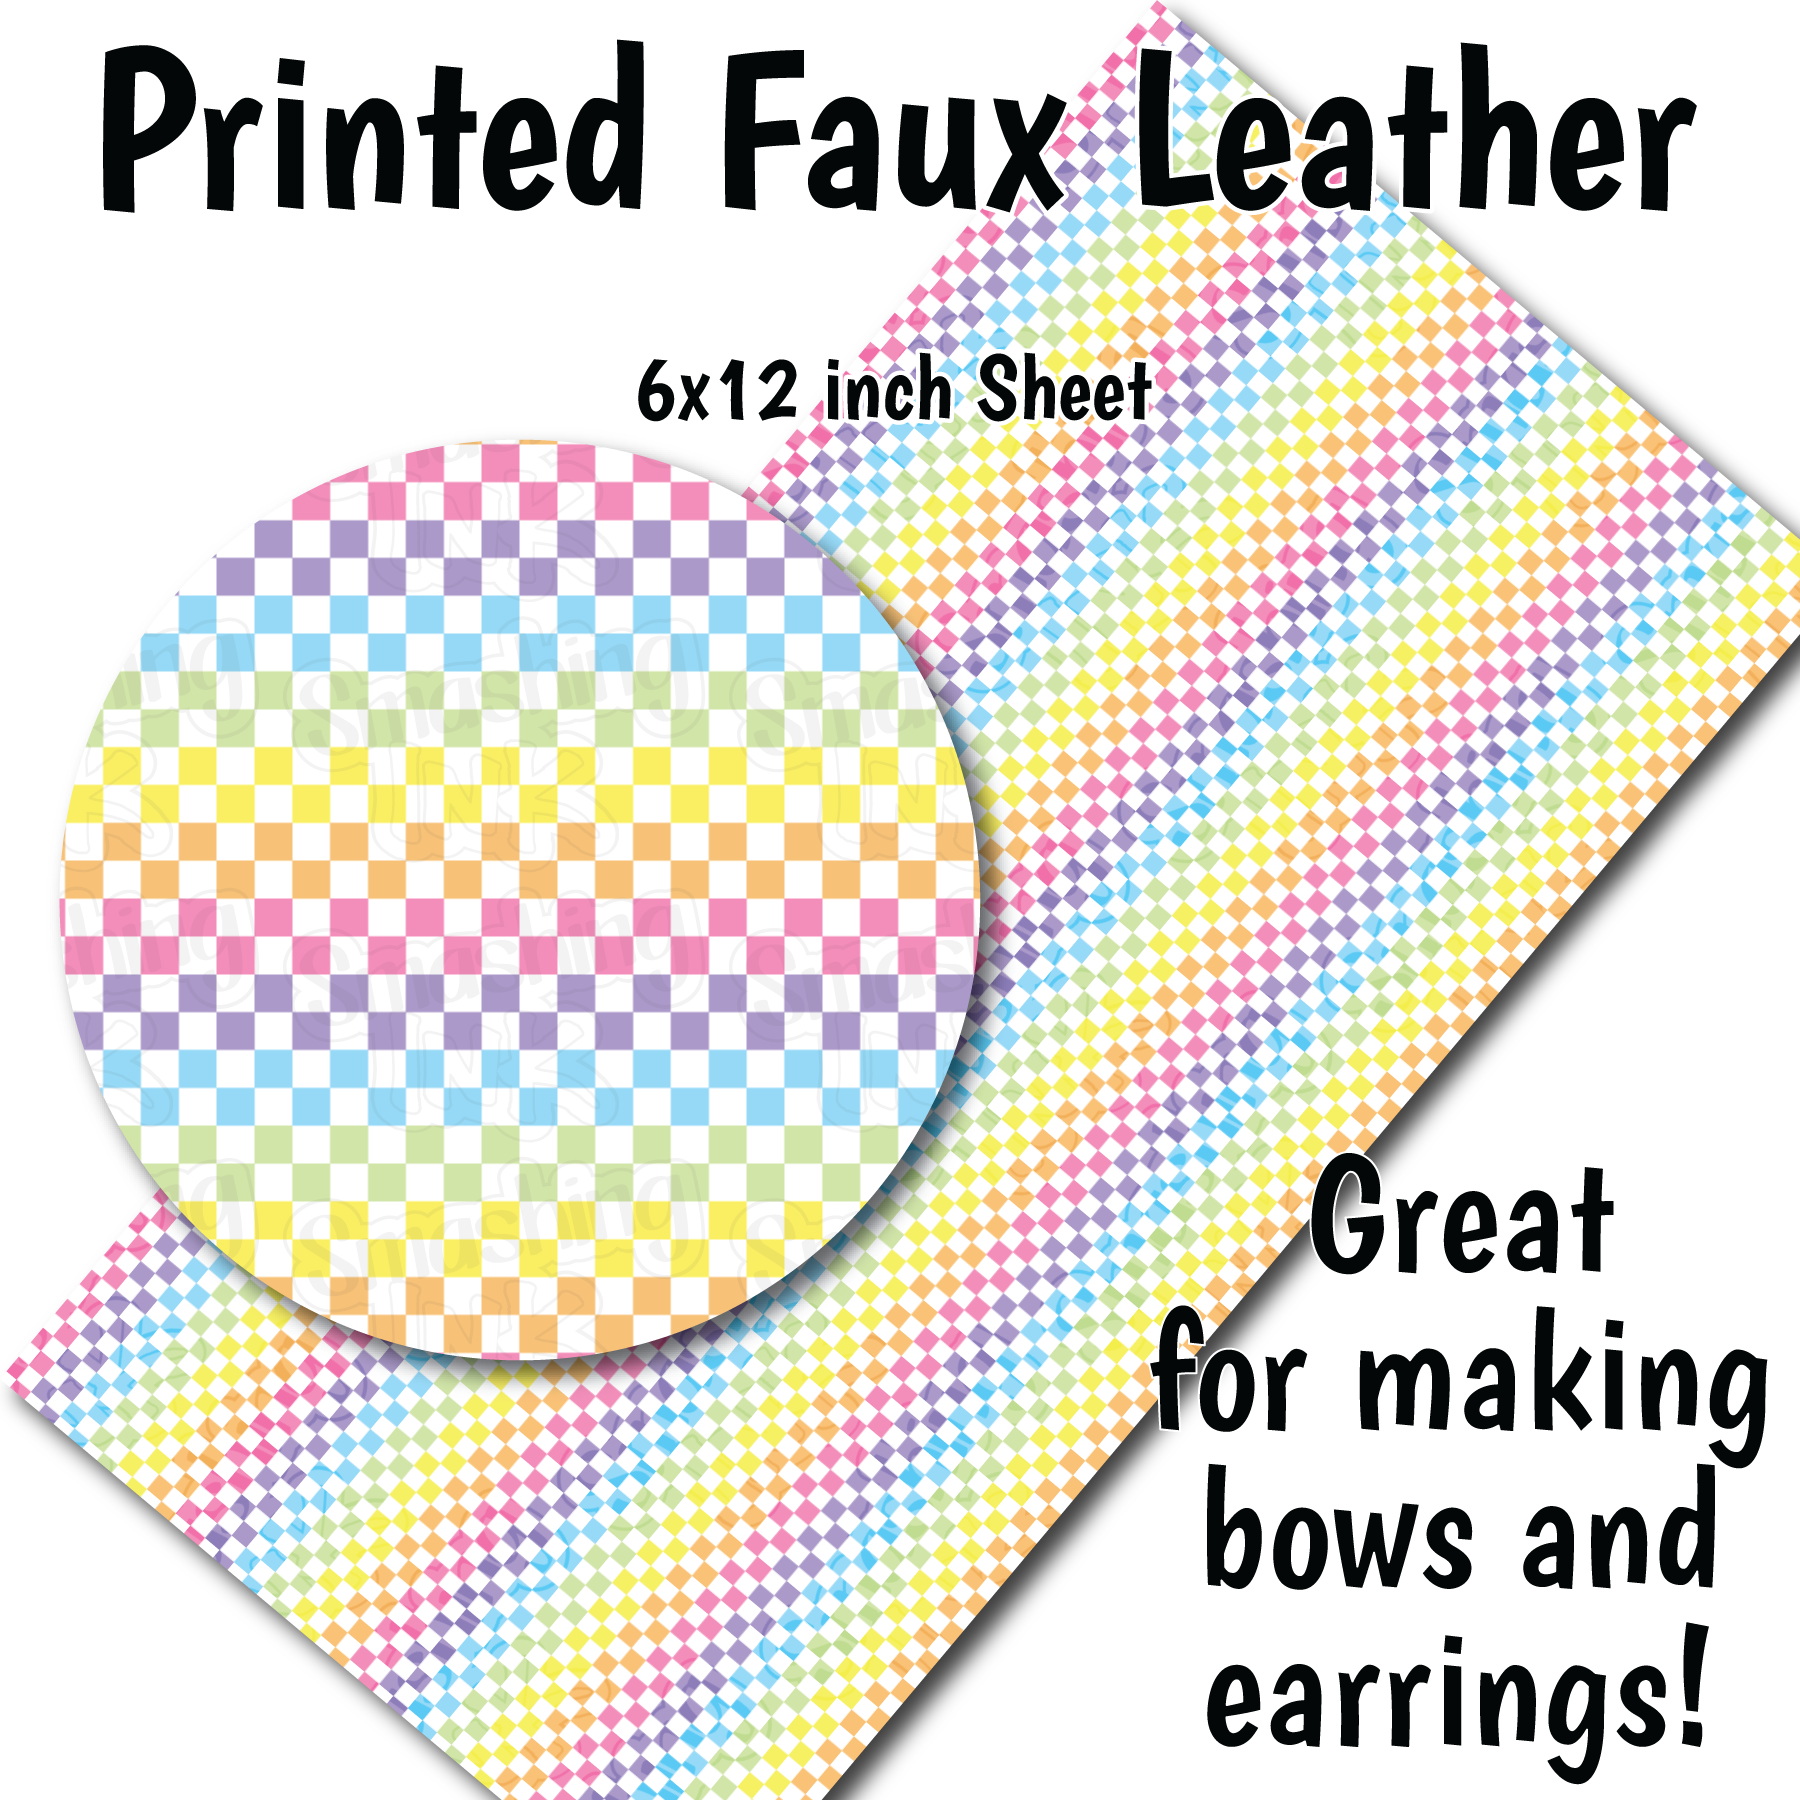 Rainbow Checkerboard G - Faux Leather Sheet (SHIPS IN 3 BUS DAYS) –  Smashing Ink Vinyl